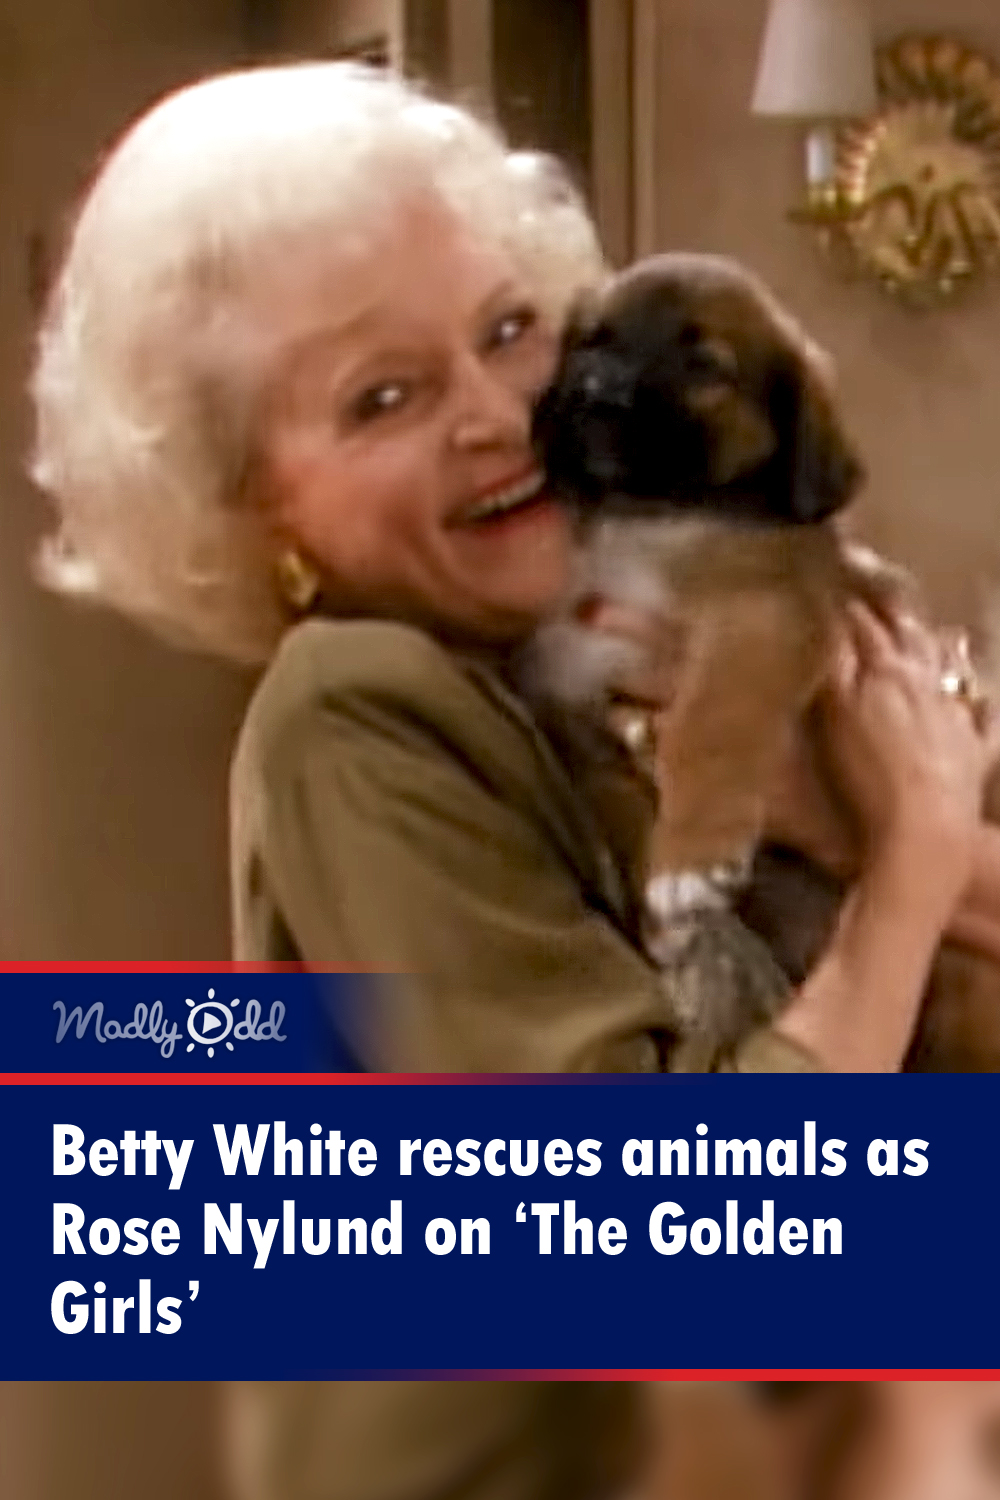 Betty White rescues animals as Rose Nylund on ‘The Golden Girls’